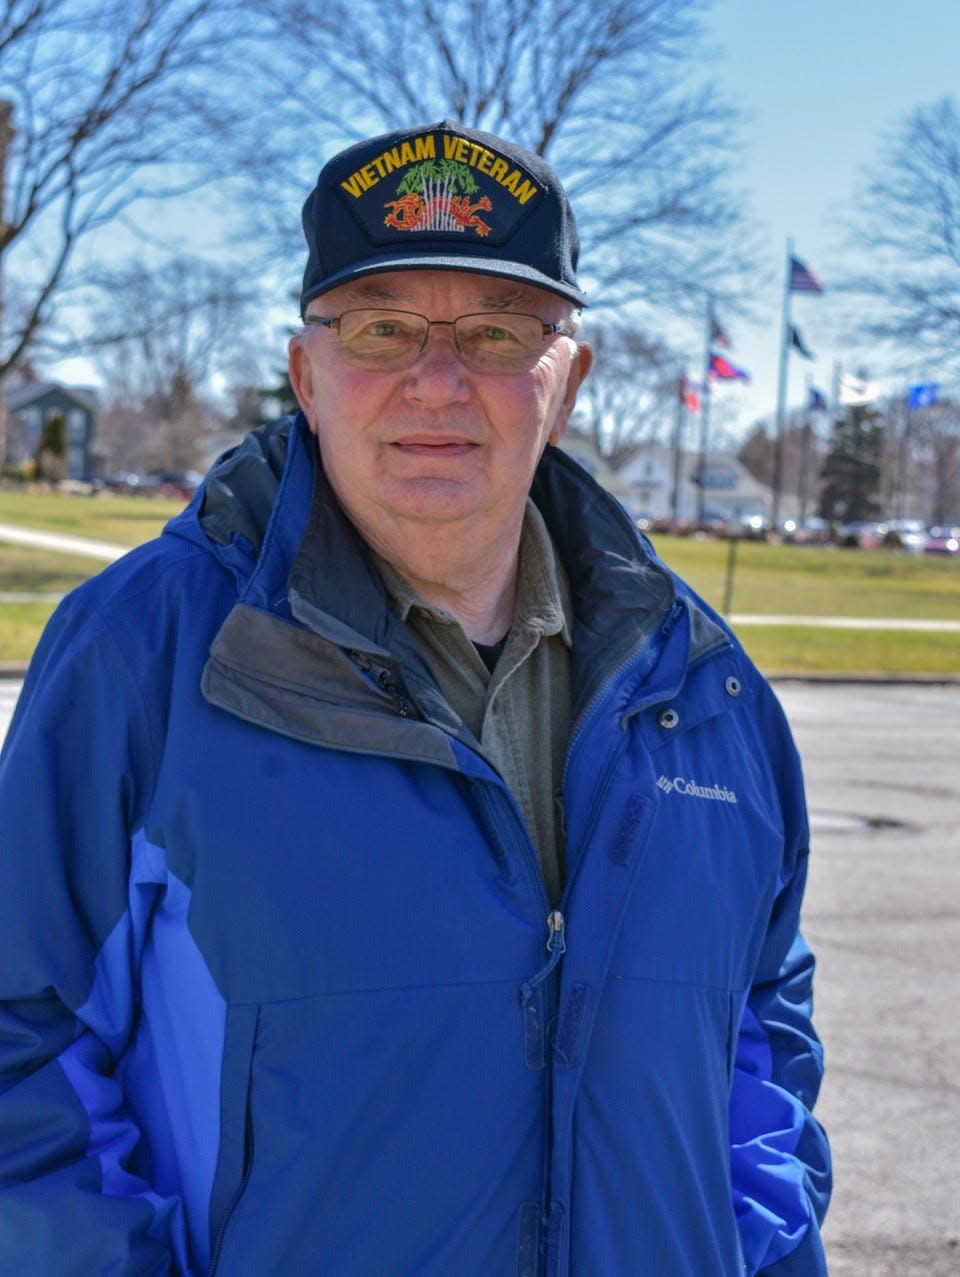 When Ken Monnin returned from the Vietnam War, a family member gave away all of his military possessions. At the time, he didn’t care because he didn’t want to be associated with the war. Today, he has nothing tangible to tie him to his sacrifice.